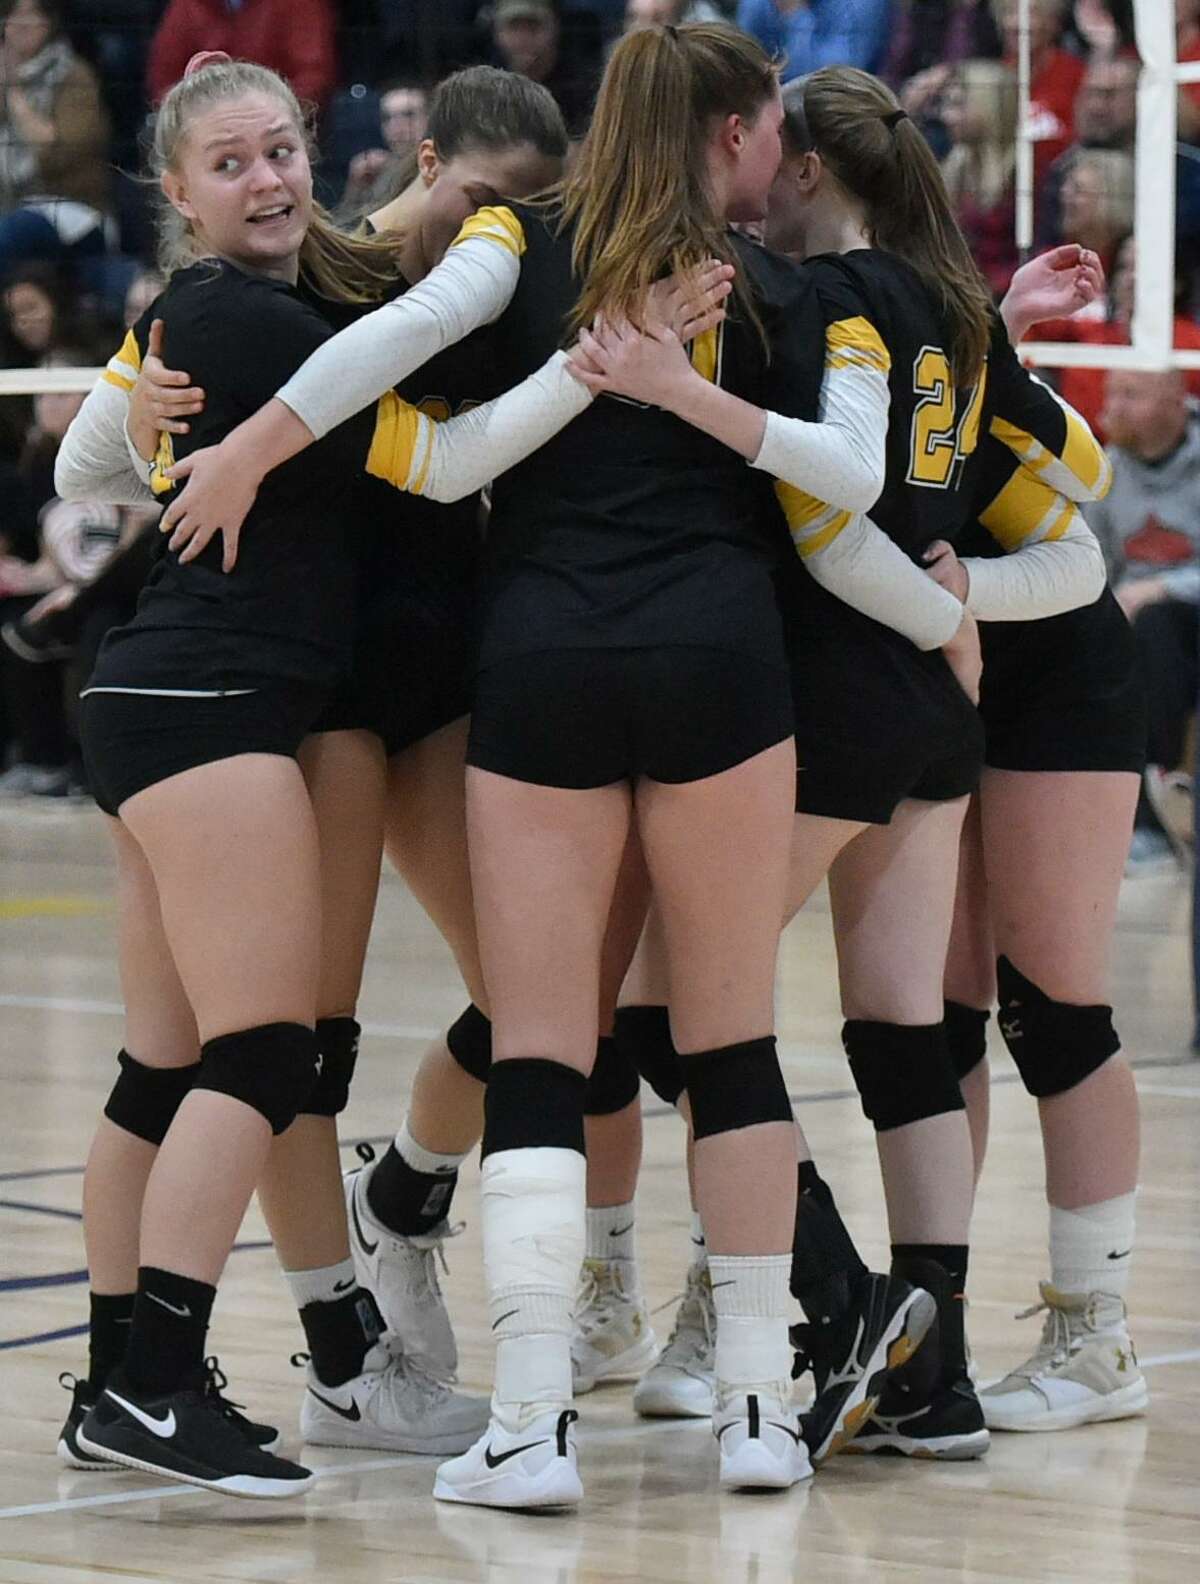 East Haven, Connecticut - Saturday, November 3, 2018: #1 Cheshire H.S. vs. #2 Amity H.S. during the first game of the SCC Girls Volleyball "Championship Final Saturday at East Haven H.S.